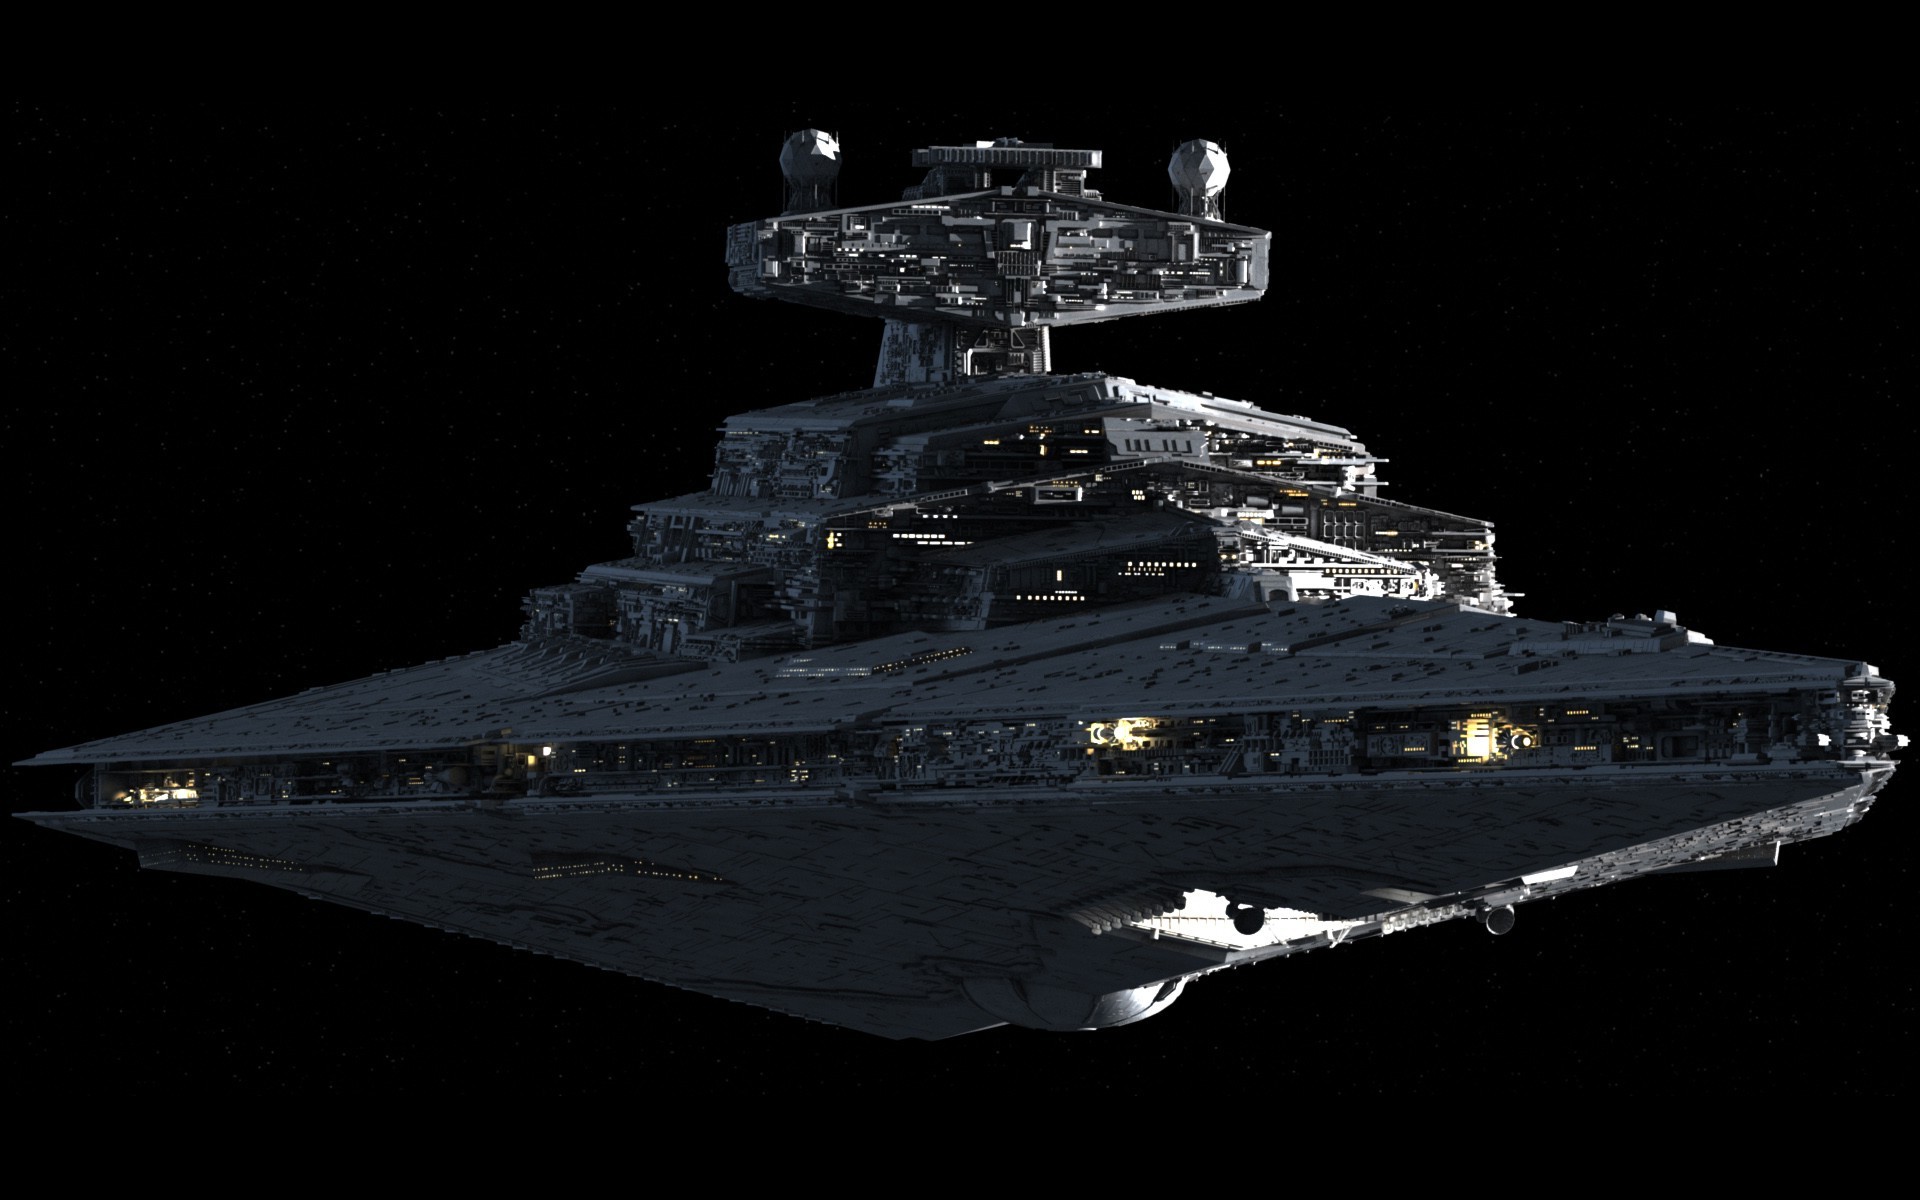 1920x1200 I made a wallpaper of the downed Star Destroyer - Imgur